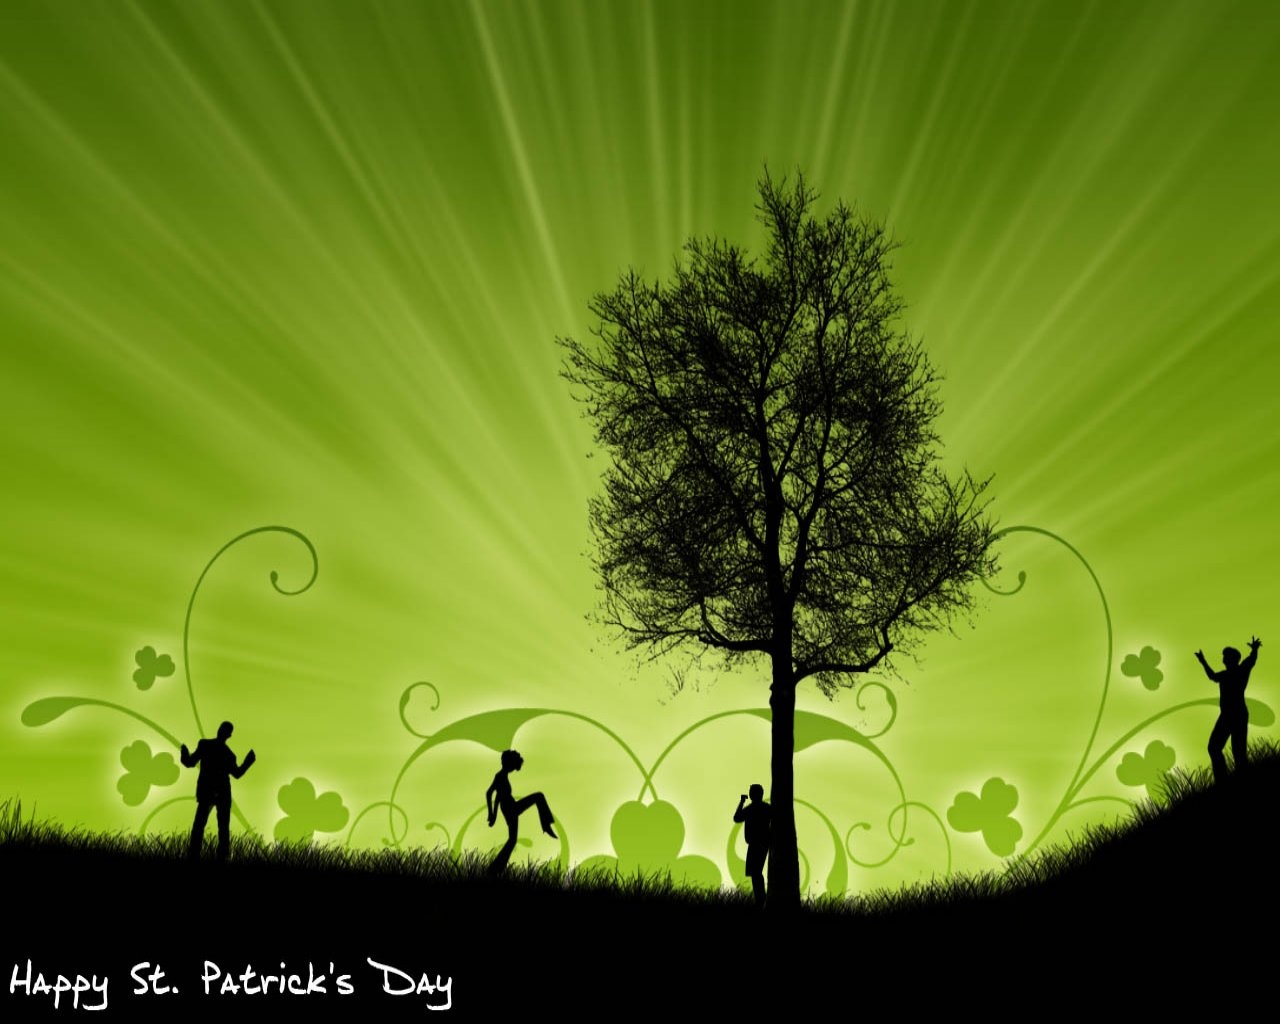  comviewhappy st patricks day wallpapersuggest com 1280x1024html